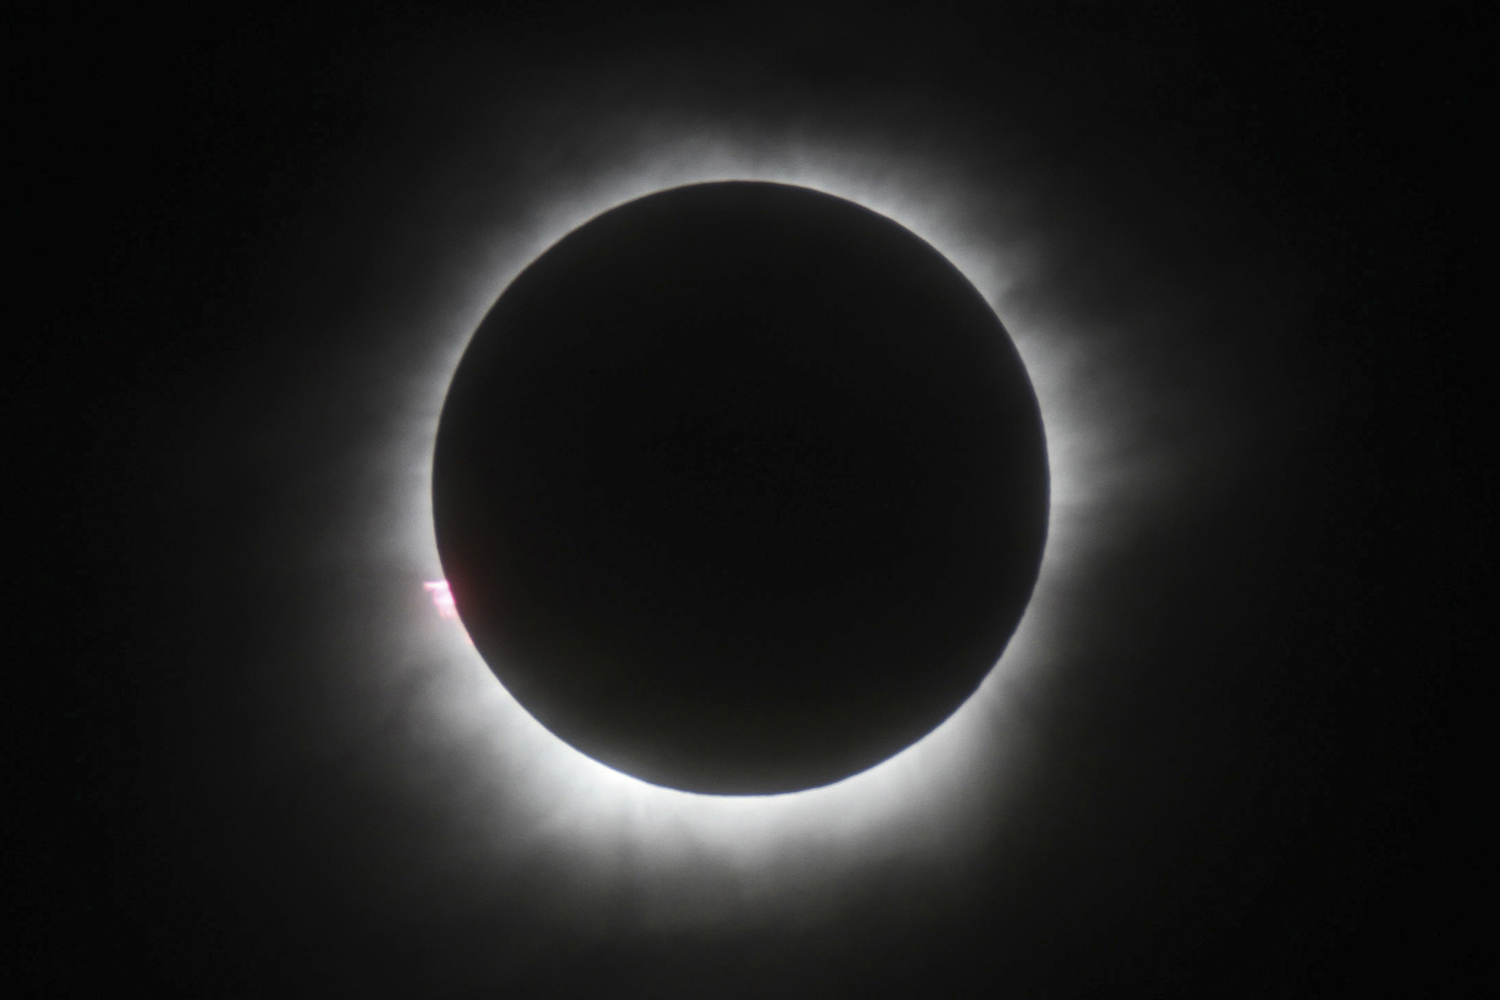 This March 9, 2016 file photo shows a total solar eclipse in Belitung, Indonesia. (AP Photo)